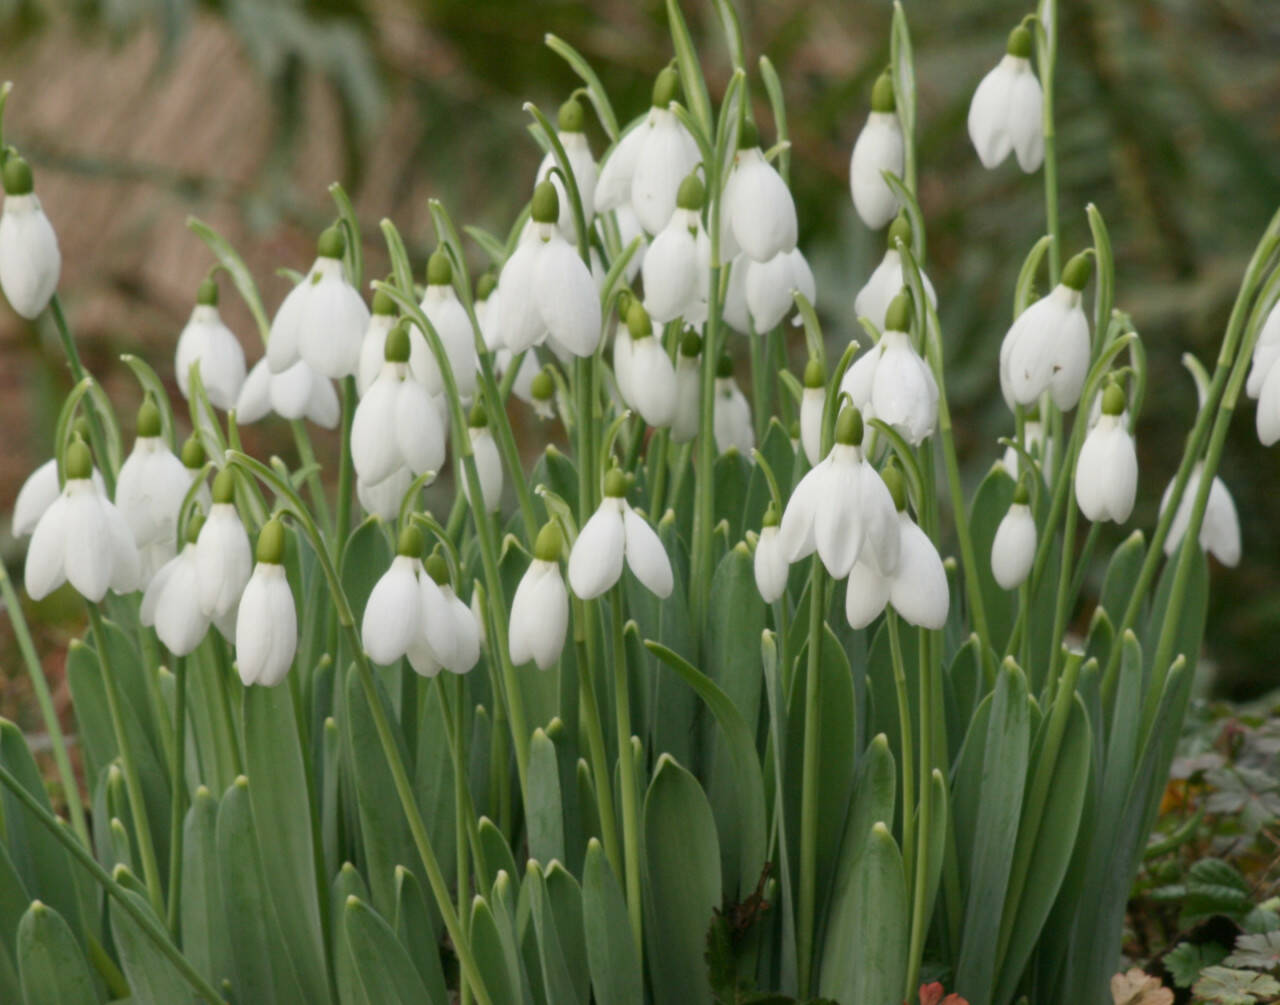 Galanthus elwesii, commonly called giant snowdrop. (Richie Steffen)